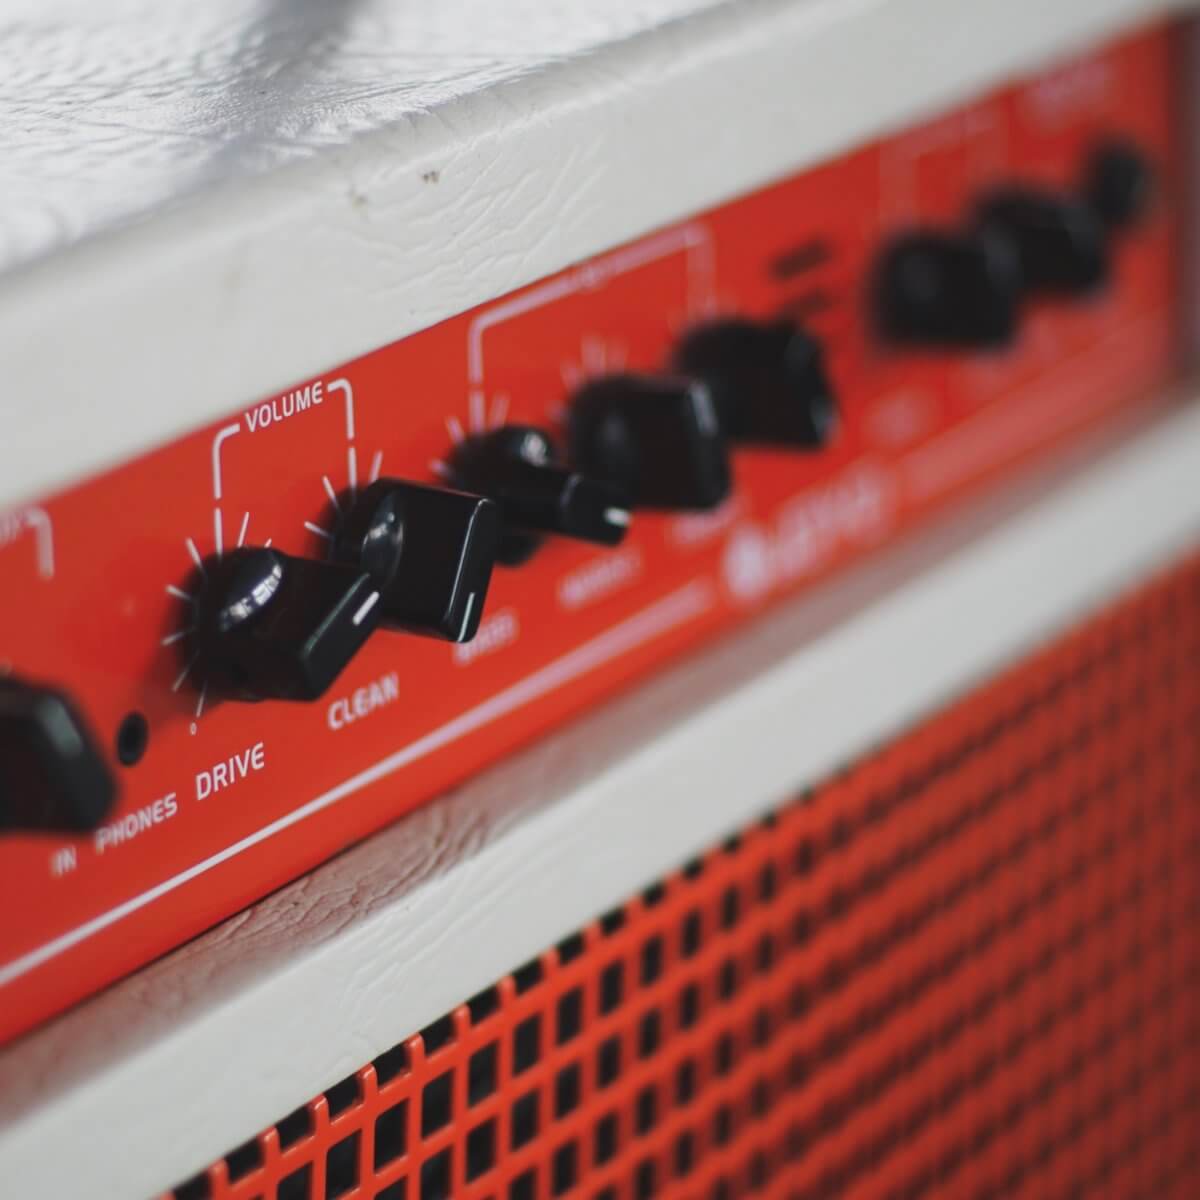 guitar amplifier to illustrate how seo amplifies an integrated marketing strategy